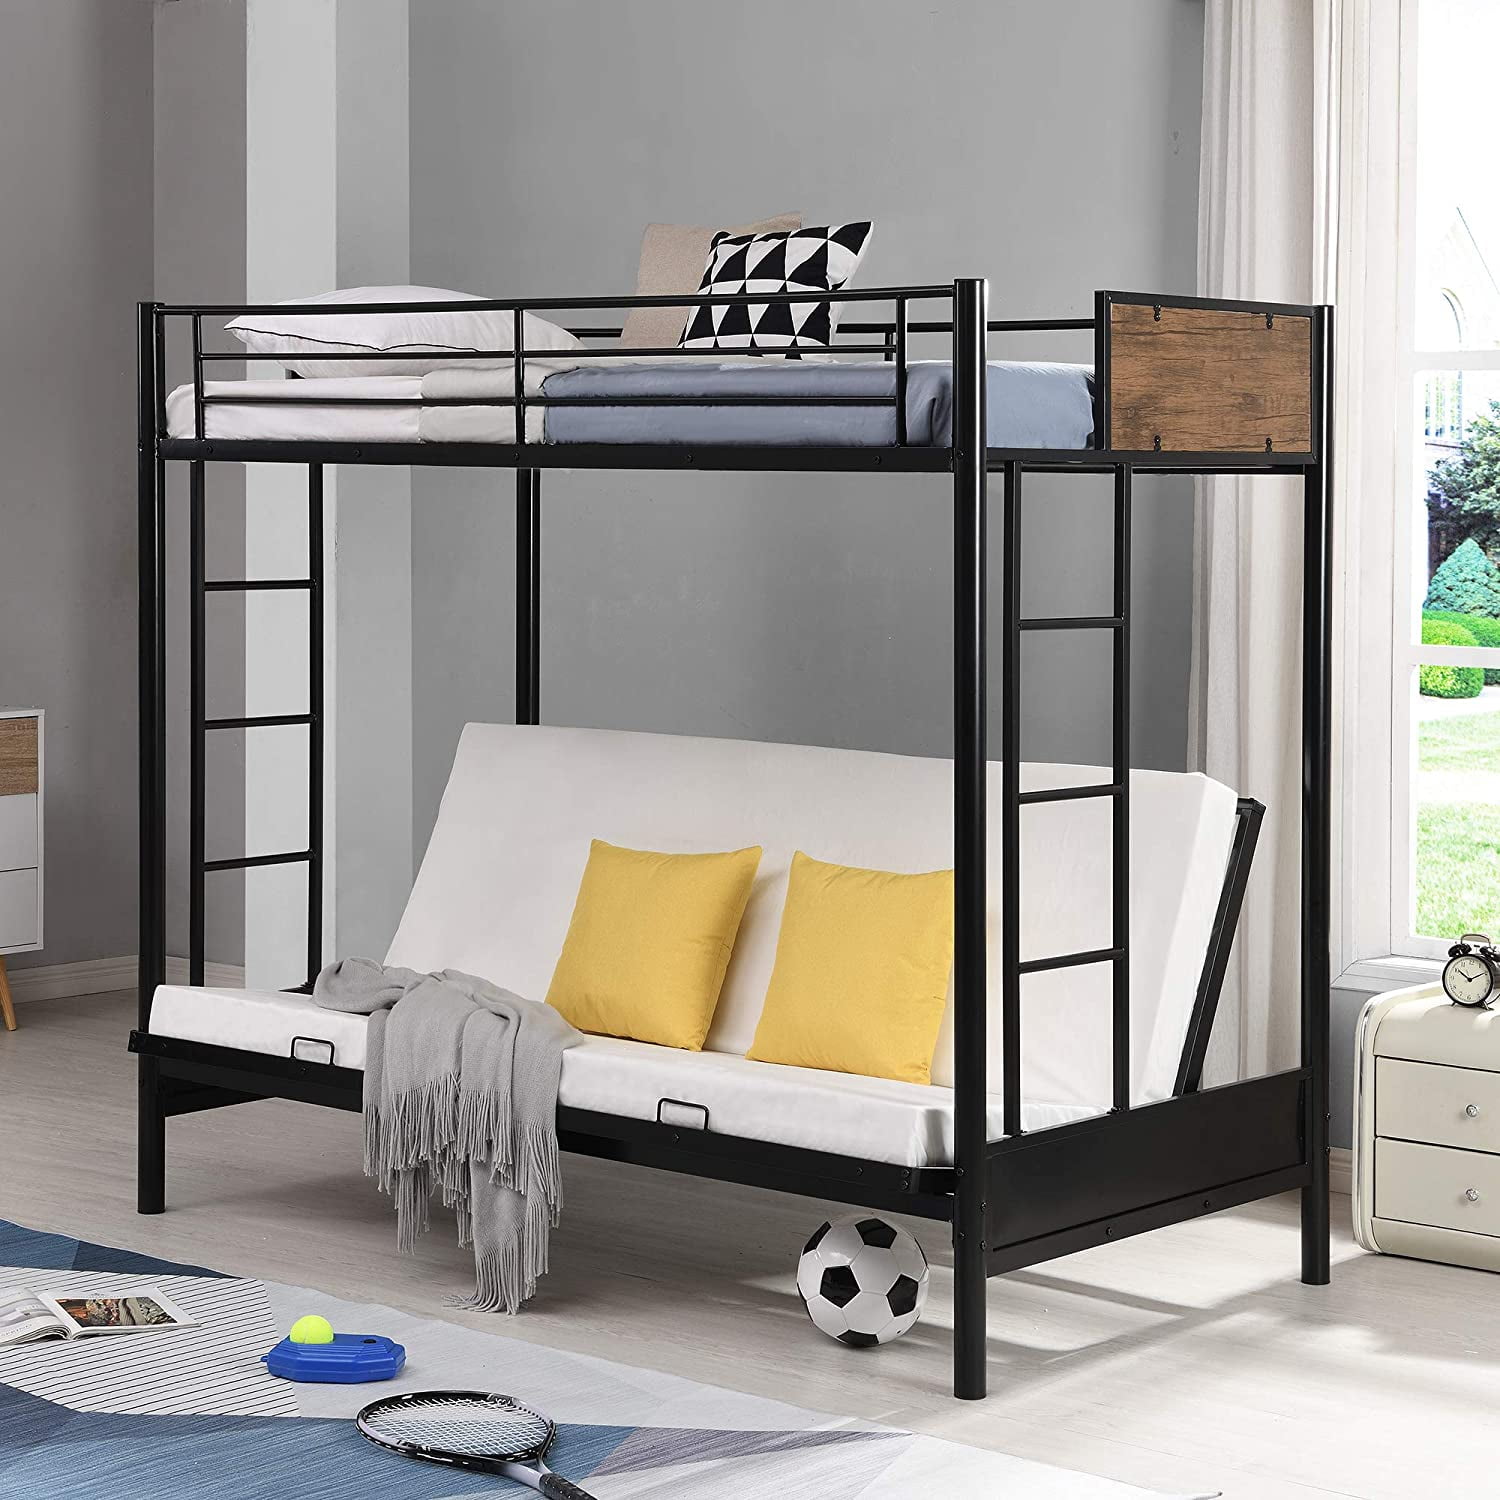 Piscis Convertible Twin Over Futon Bed, Full Over Futon Bunk Bed